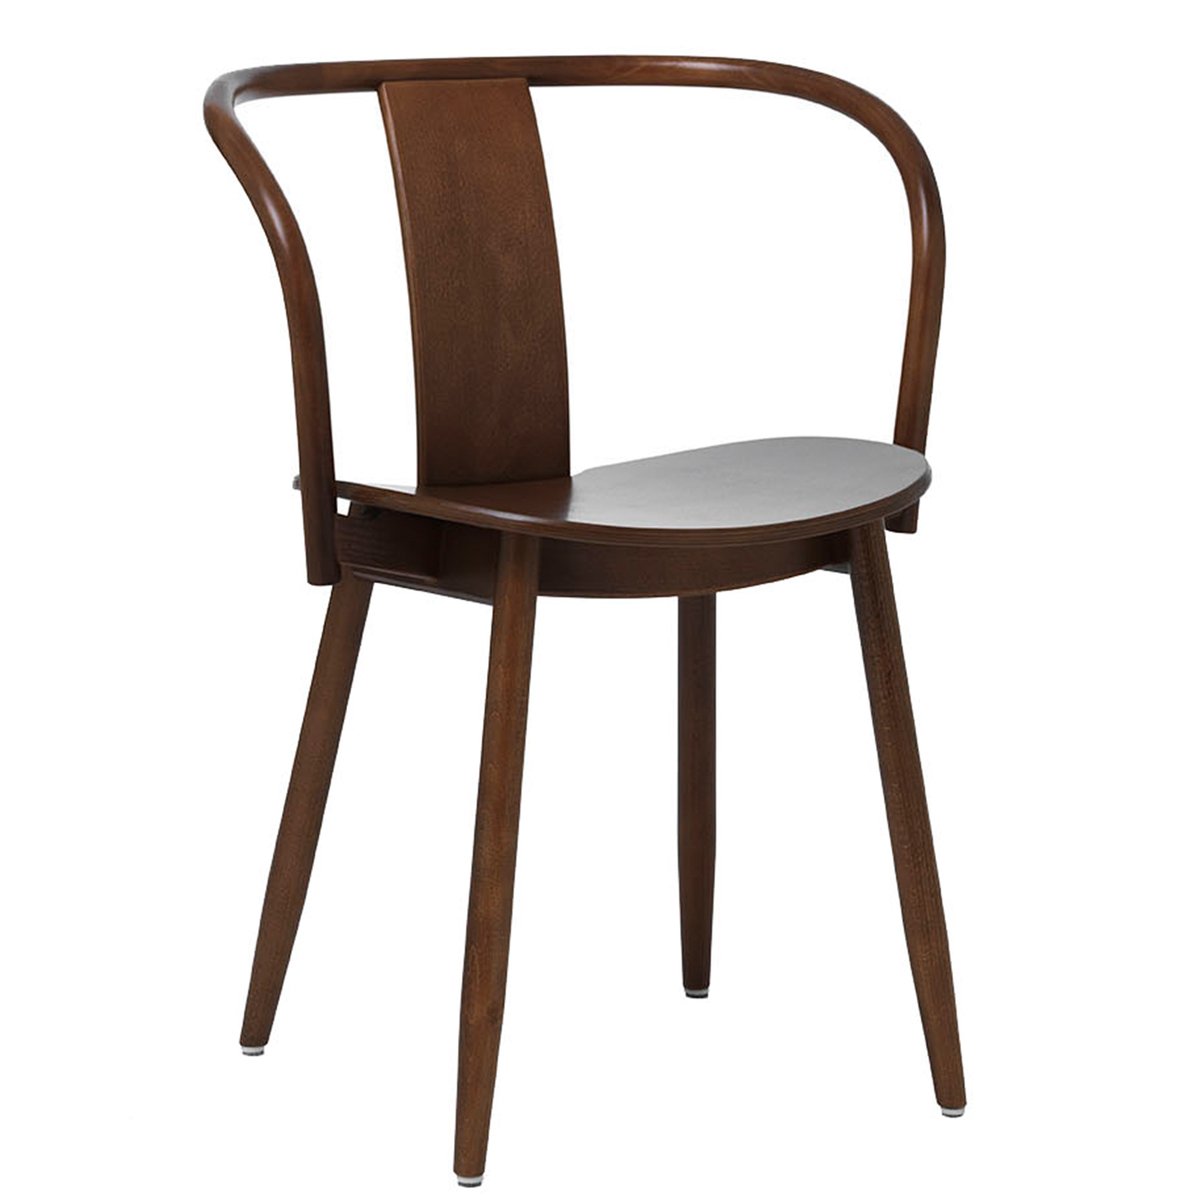 Massproductions Icha chair, walnut stained beech | Pre-used design ...